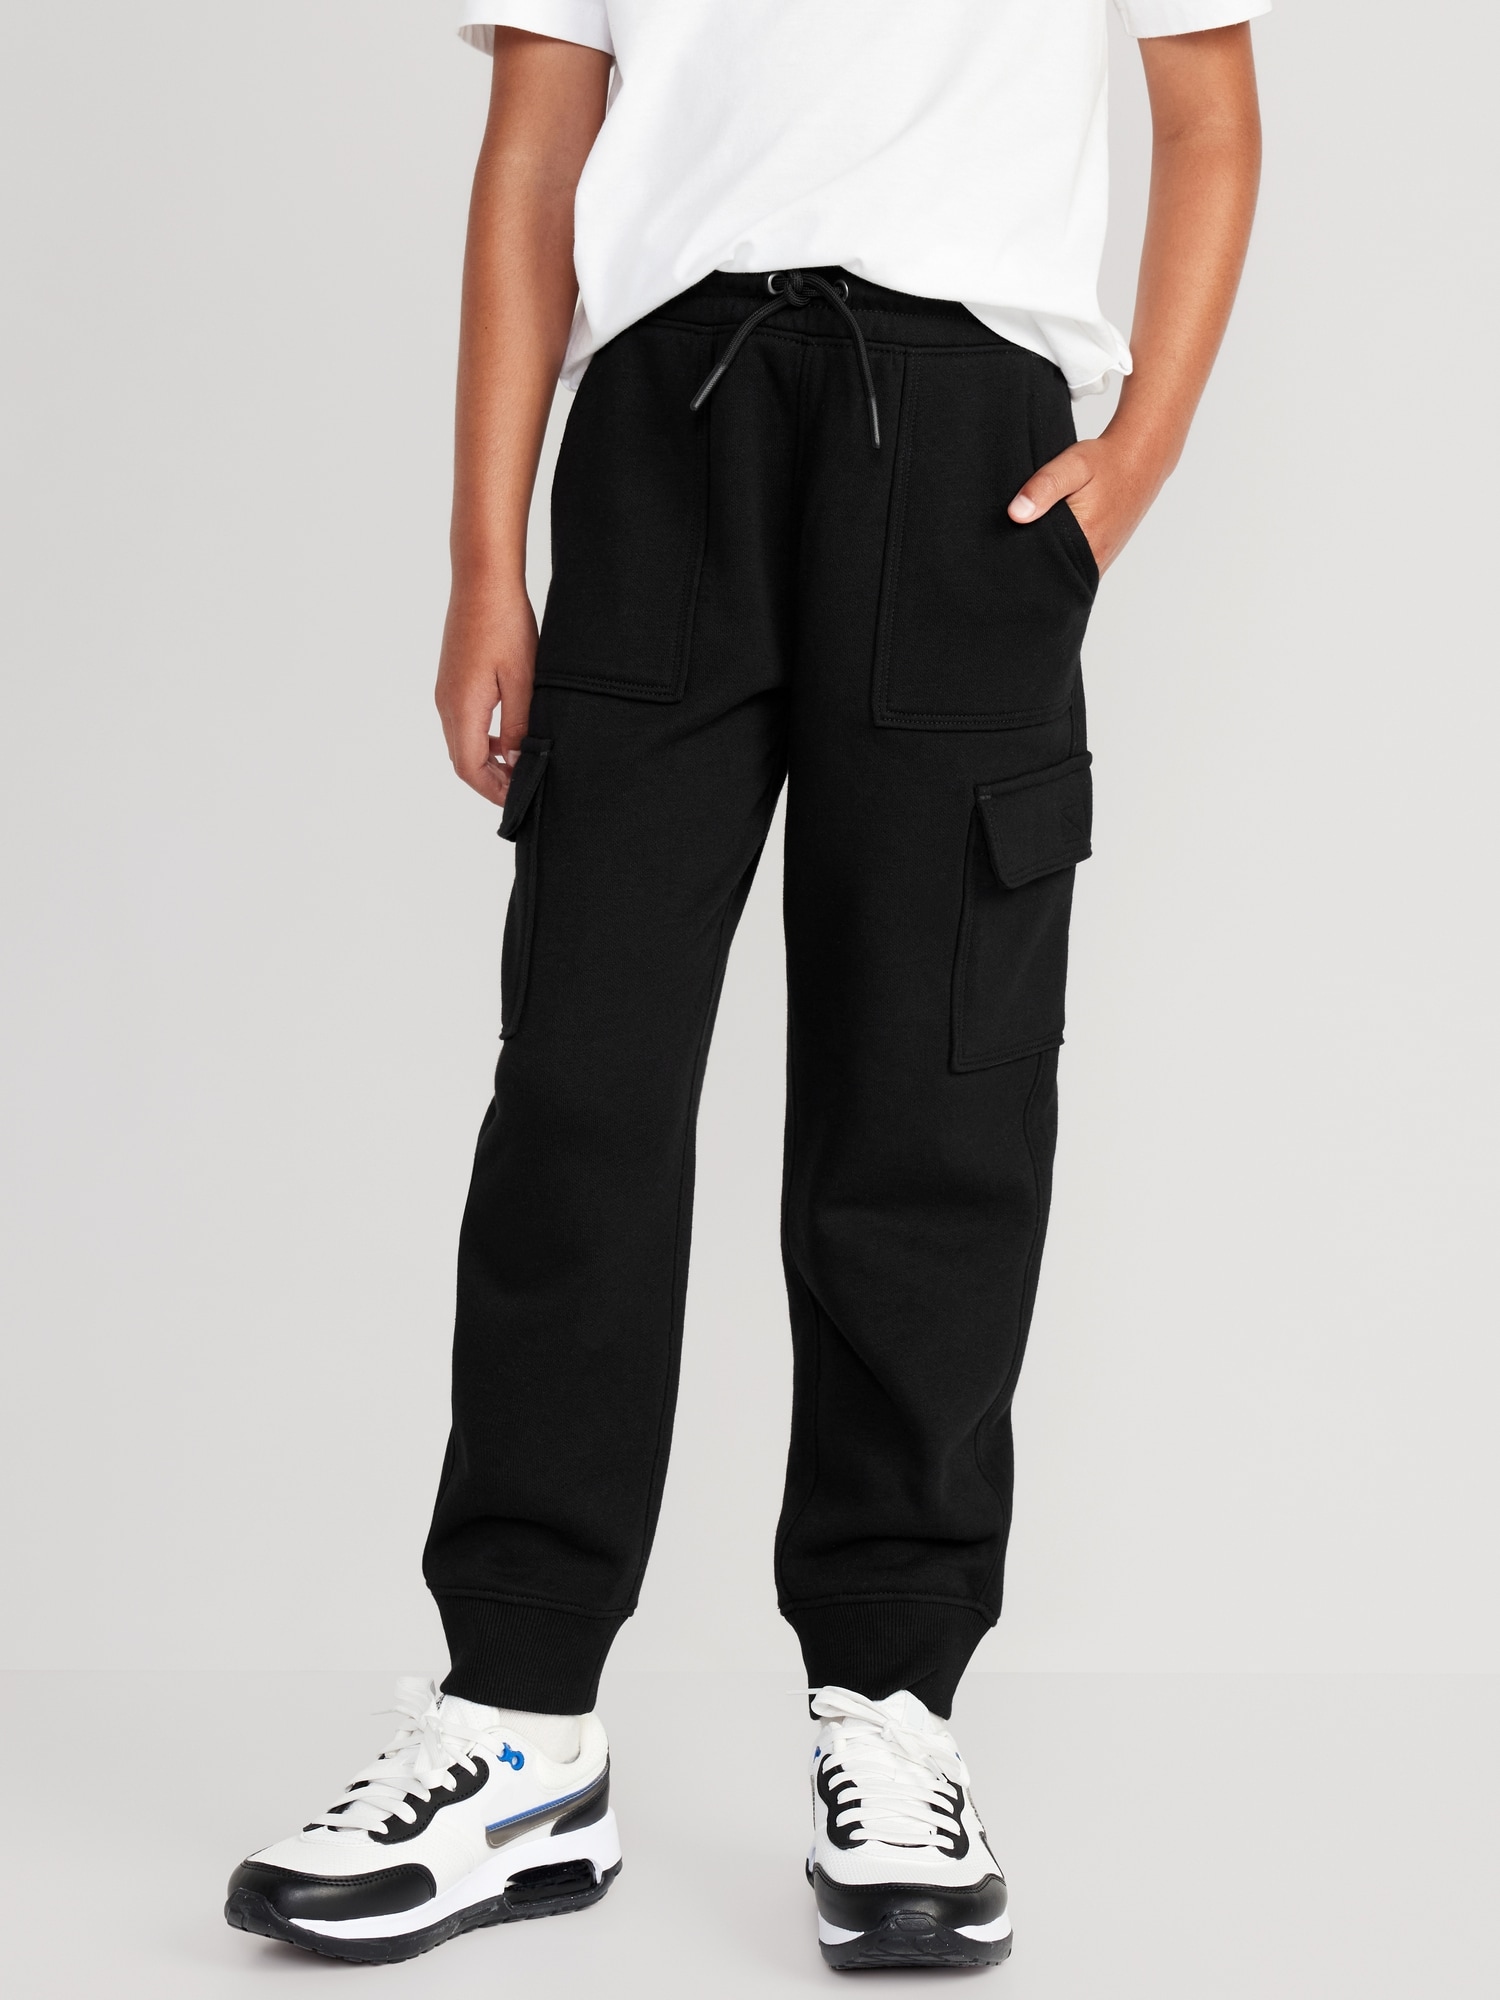 Butter Jogger With Side Cargo Pockets in Charcoal – Max & Addy